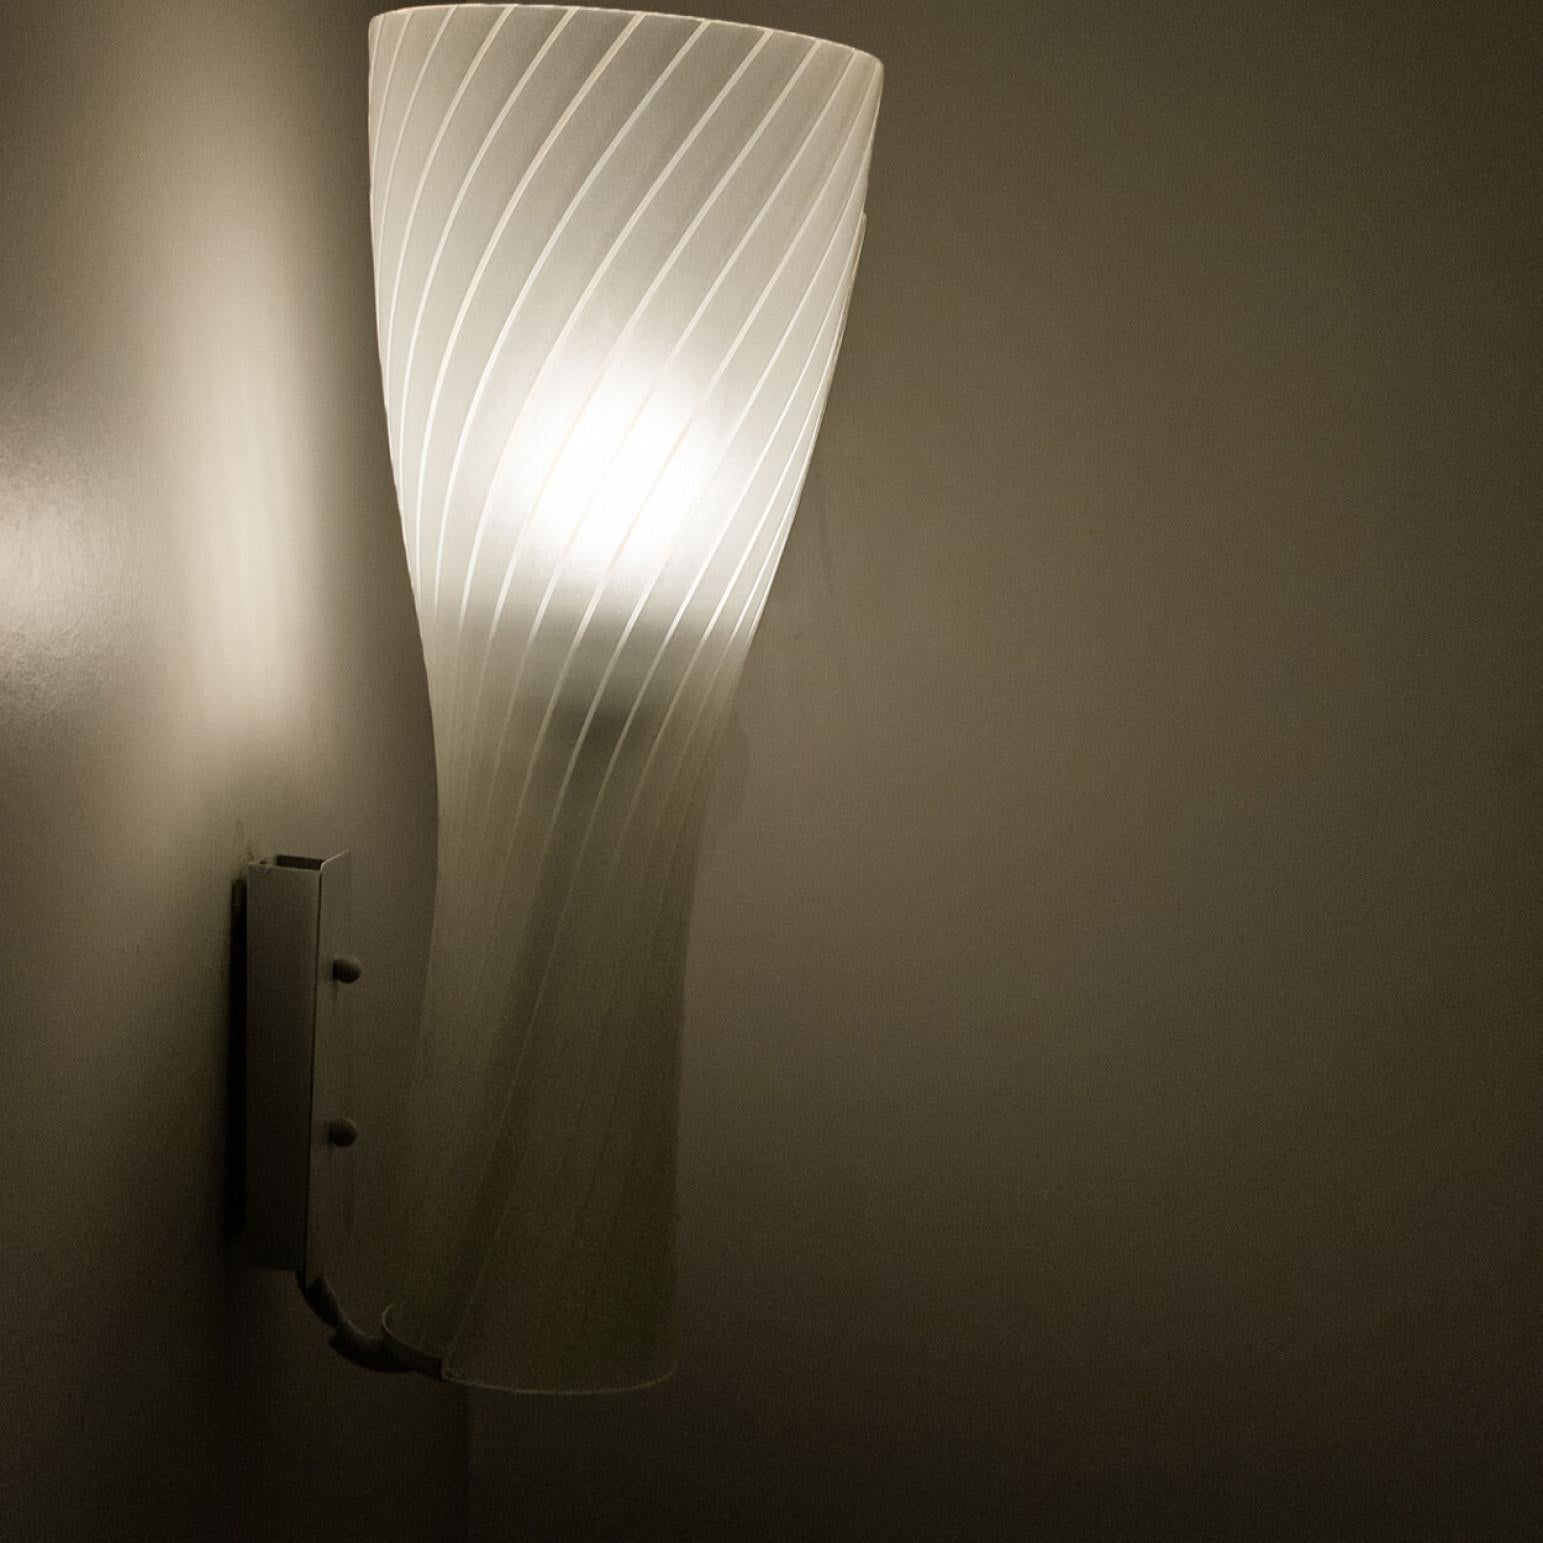 Other 1 of 6 Striped Clear White Glass Wall Lights by Gangkofner for Peill, Germany For Sale